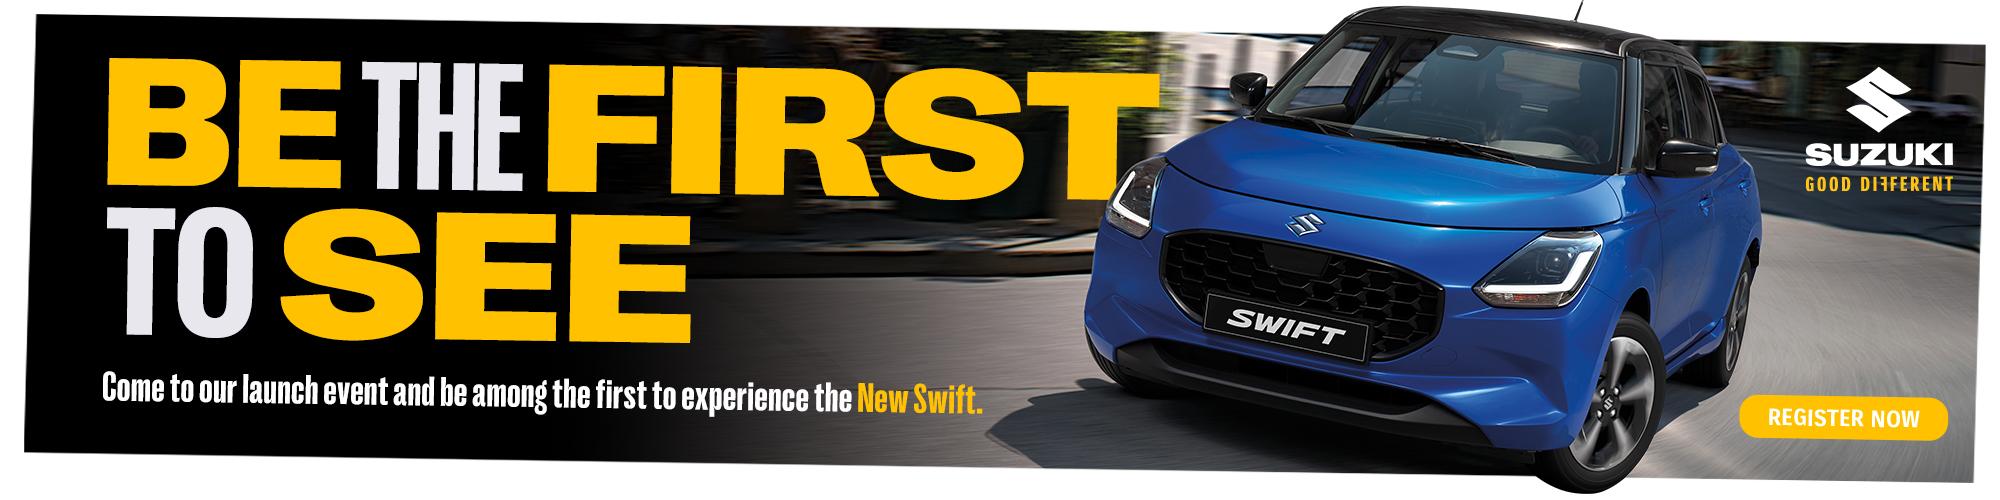 New Swift has arrived!